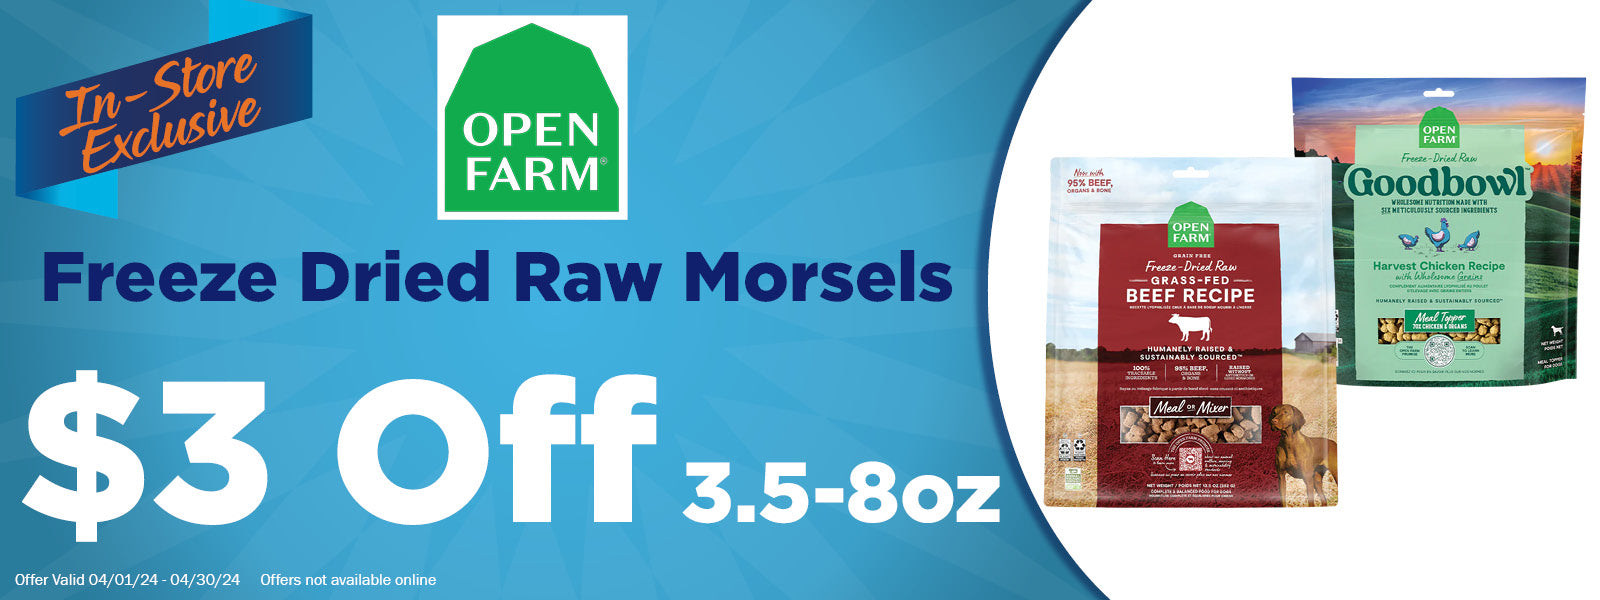 In-Store Exclusive Offer - Open Farm Freeze Dried Morsels 3.5-8oz